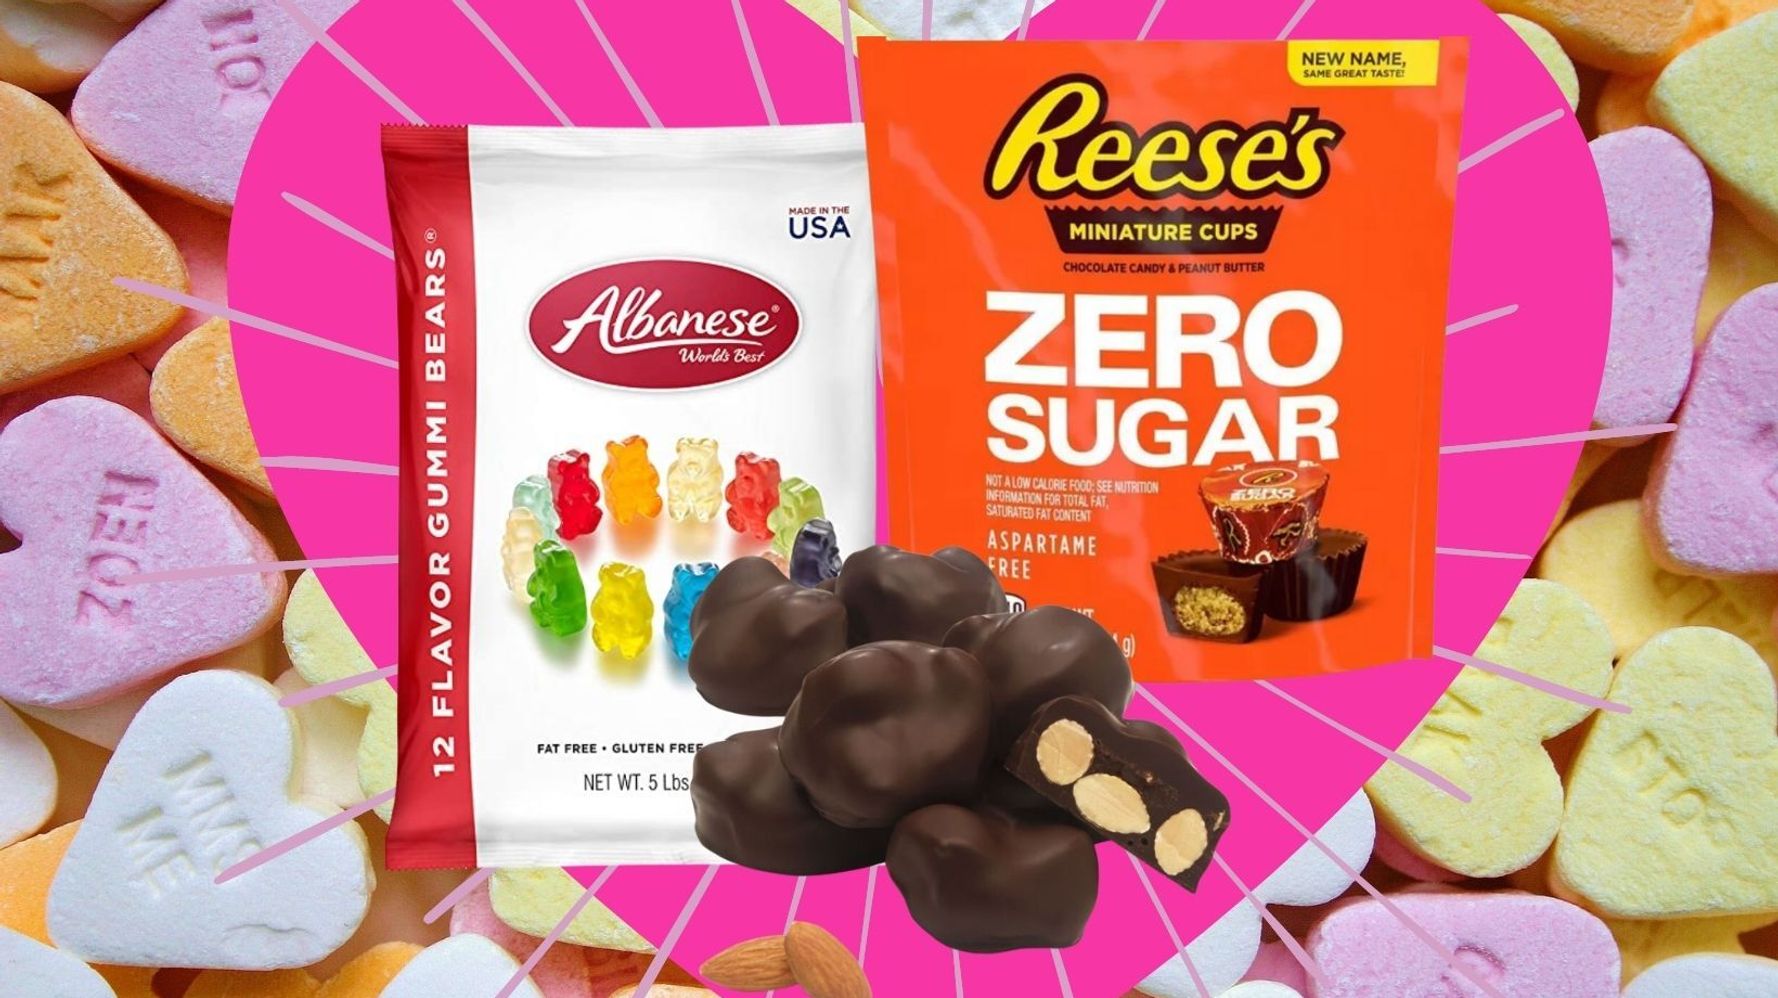 Is Sugar-Free Candy Good or Bad for You?